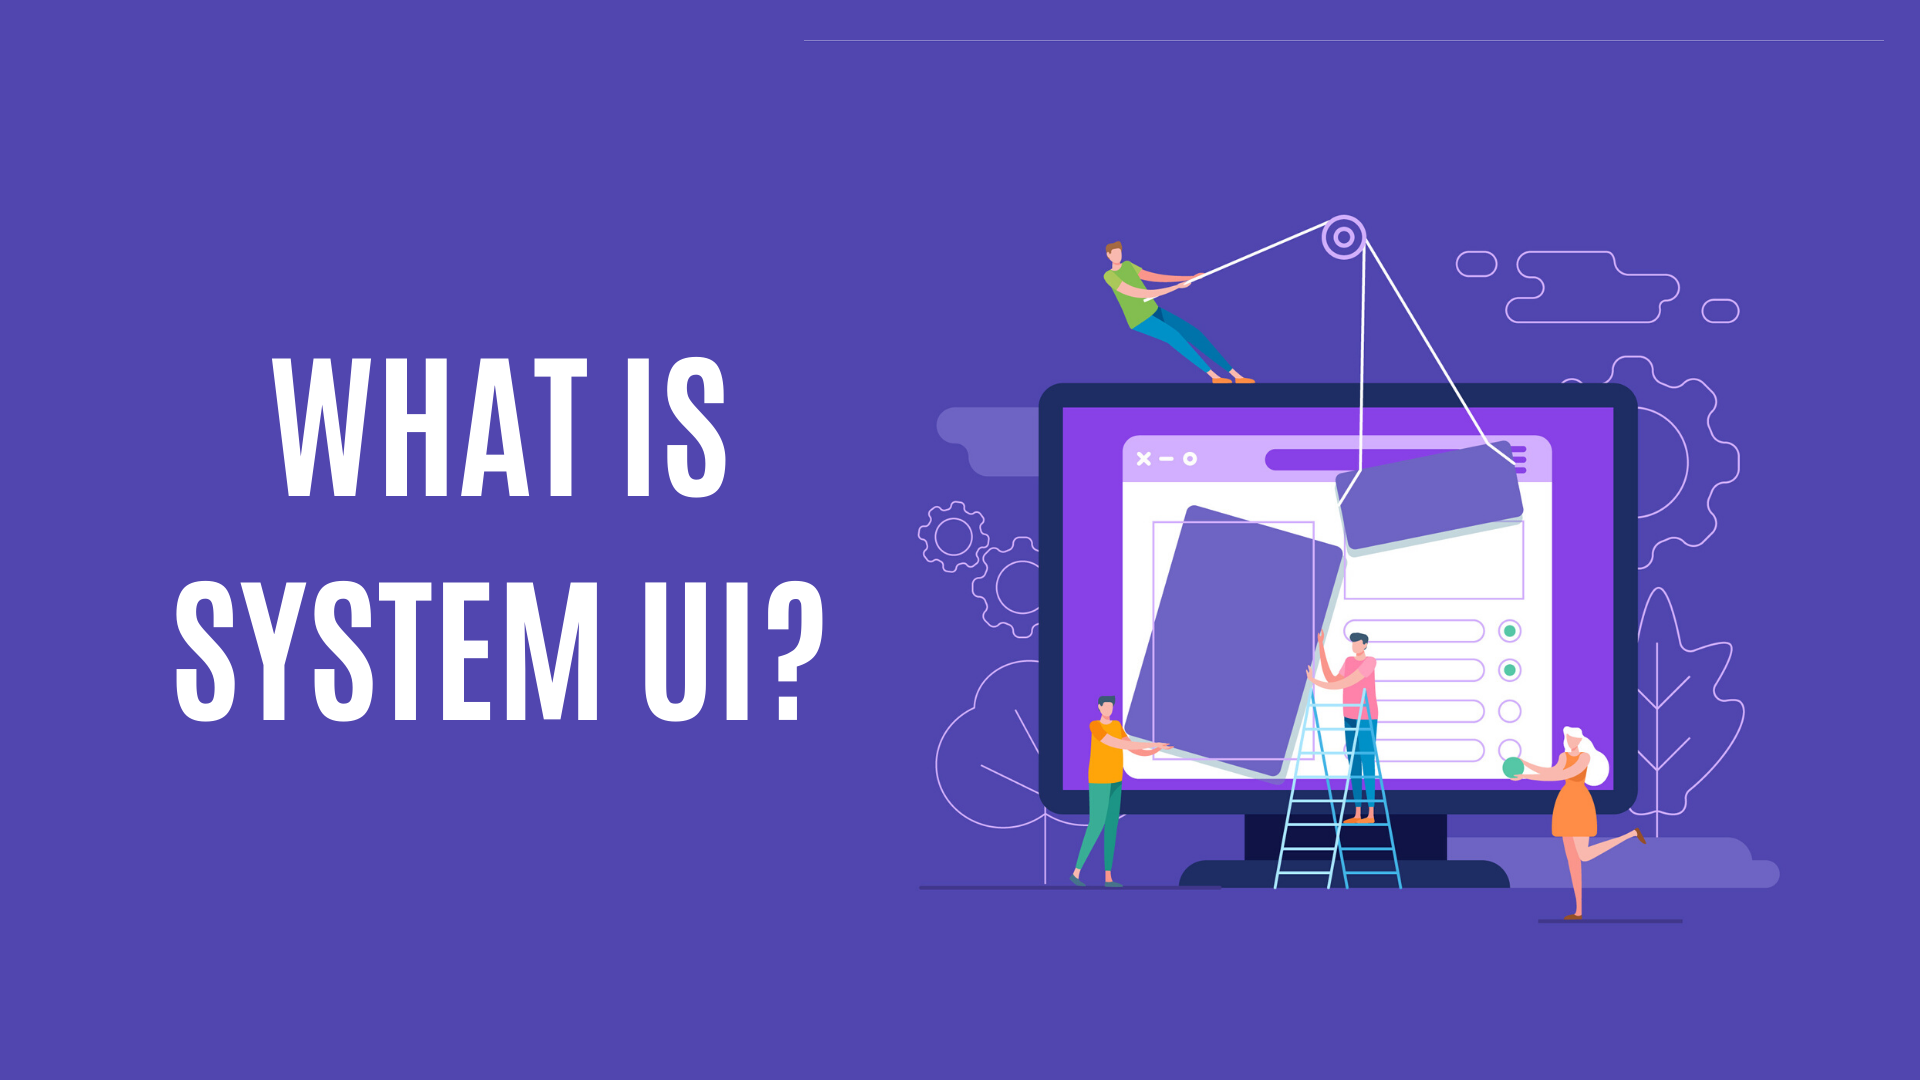 What is System UI?